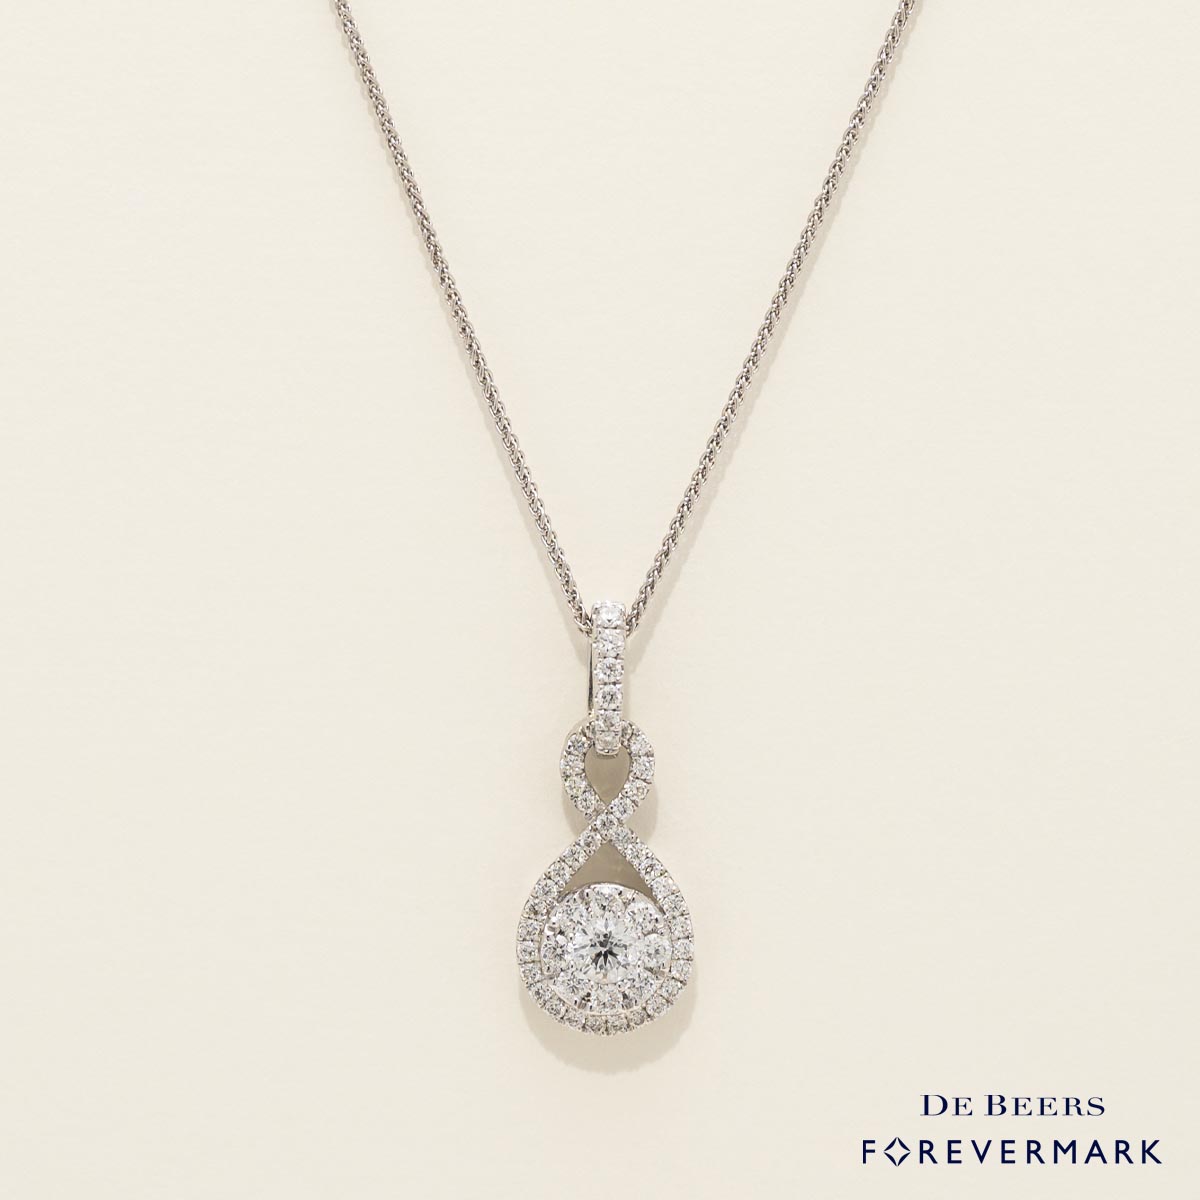 De Beers Forevermark Center of My Universe Diamond Halo Infinity Necklace in 18kt White Gold (1/2ct tw)